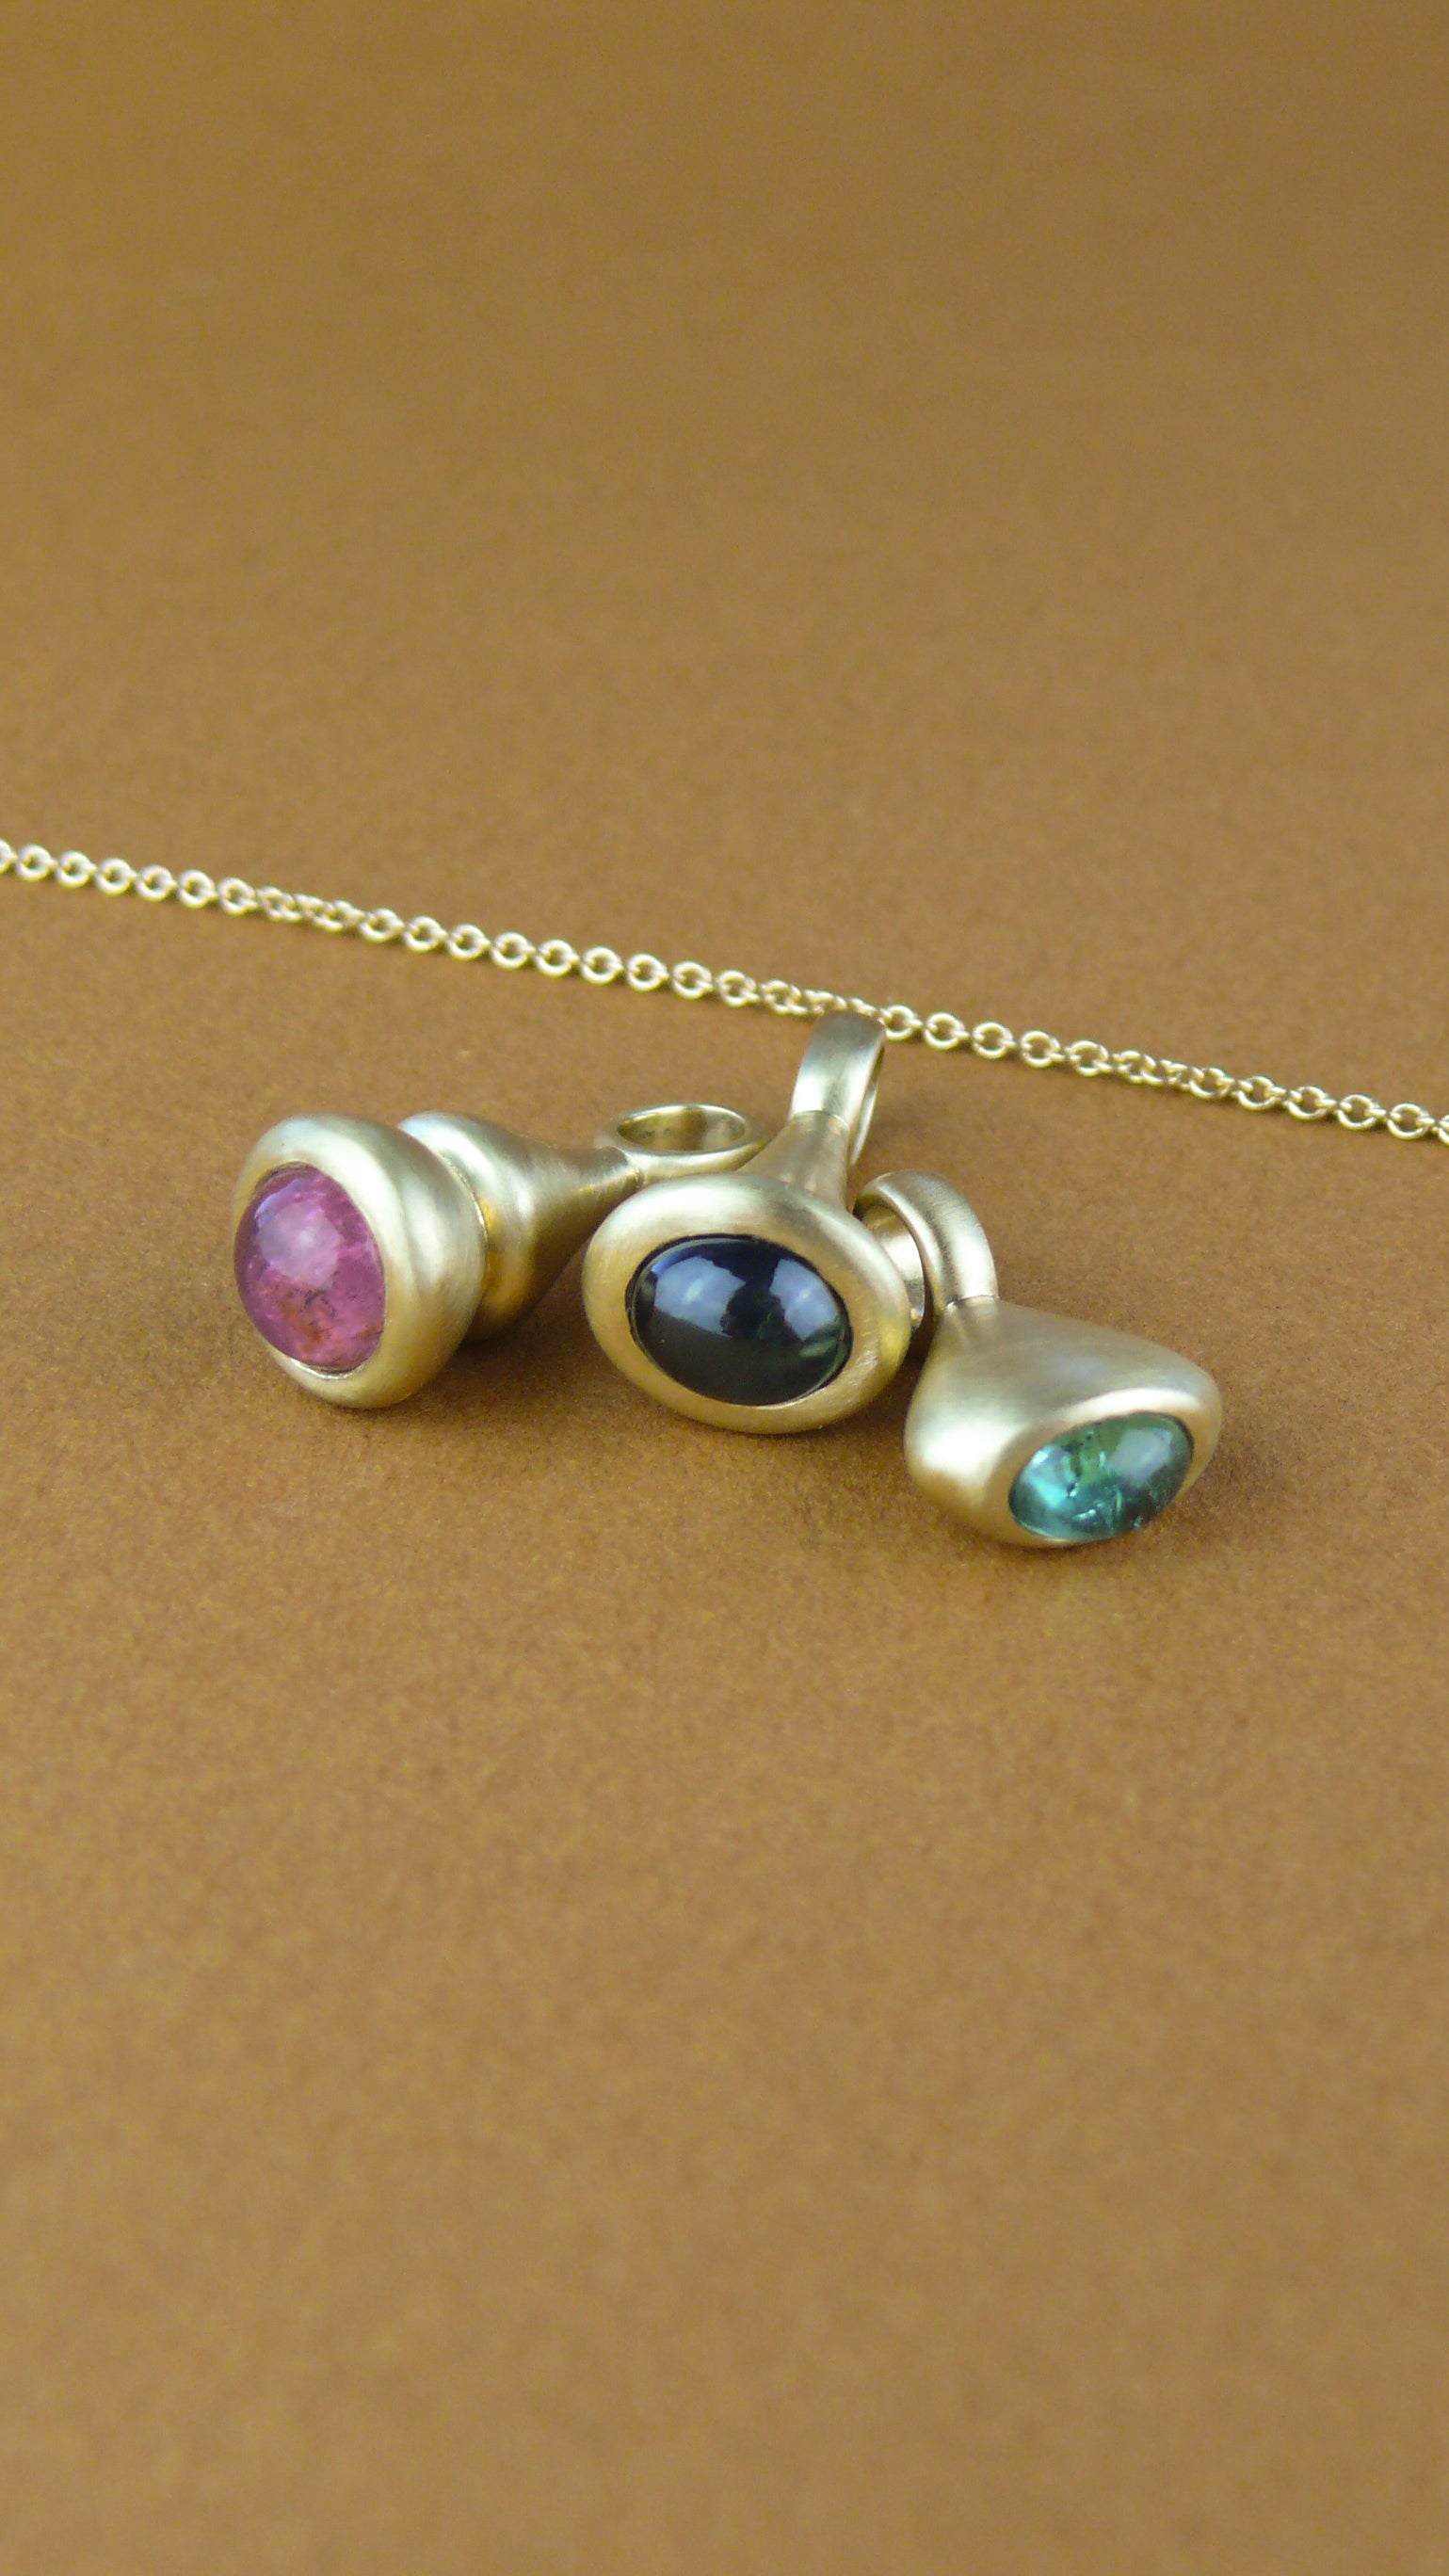 Gold Pendulum Charms with pink tourmaline, blue sapphire, and teal tourmaline on brown paper